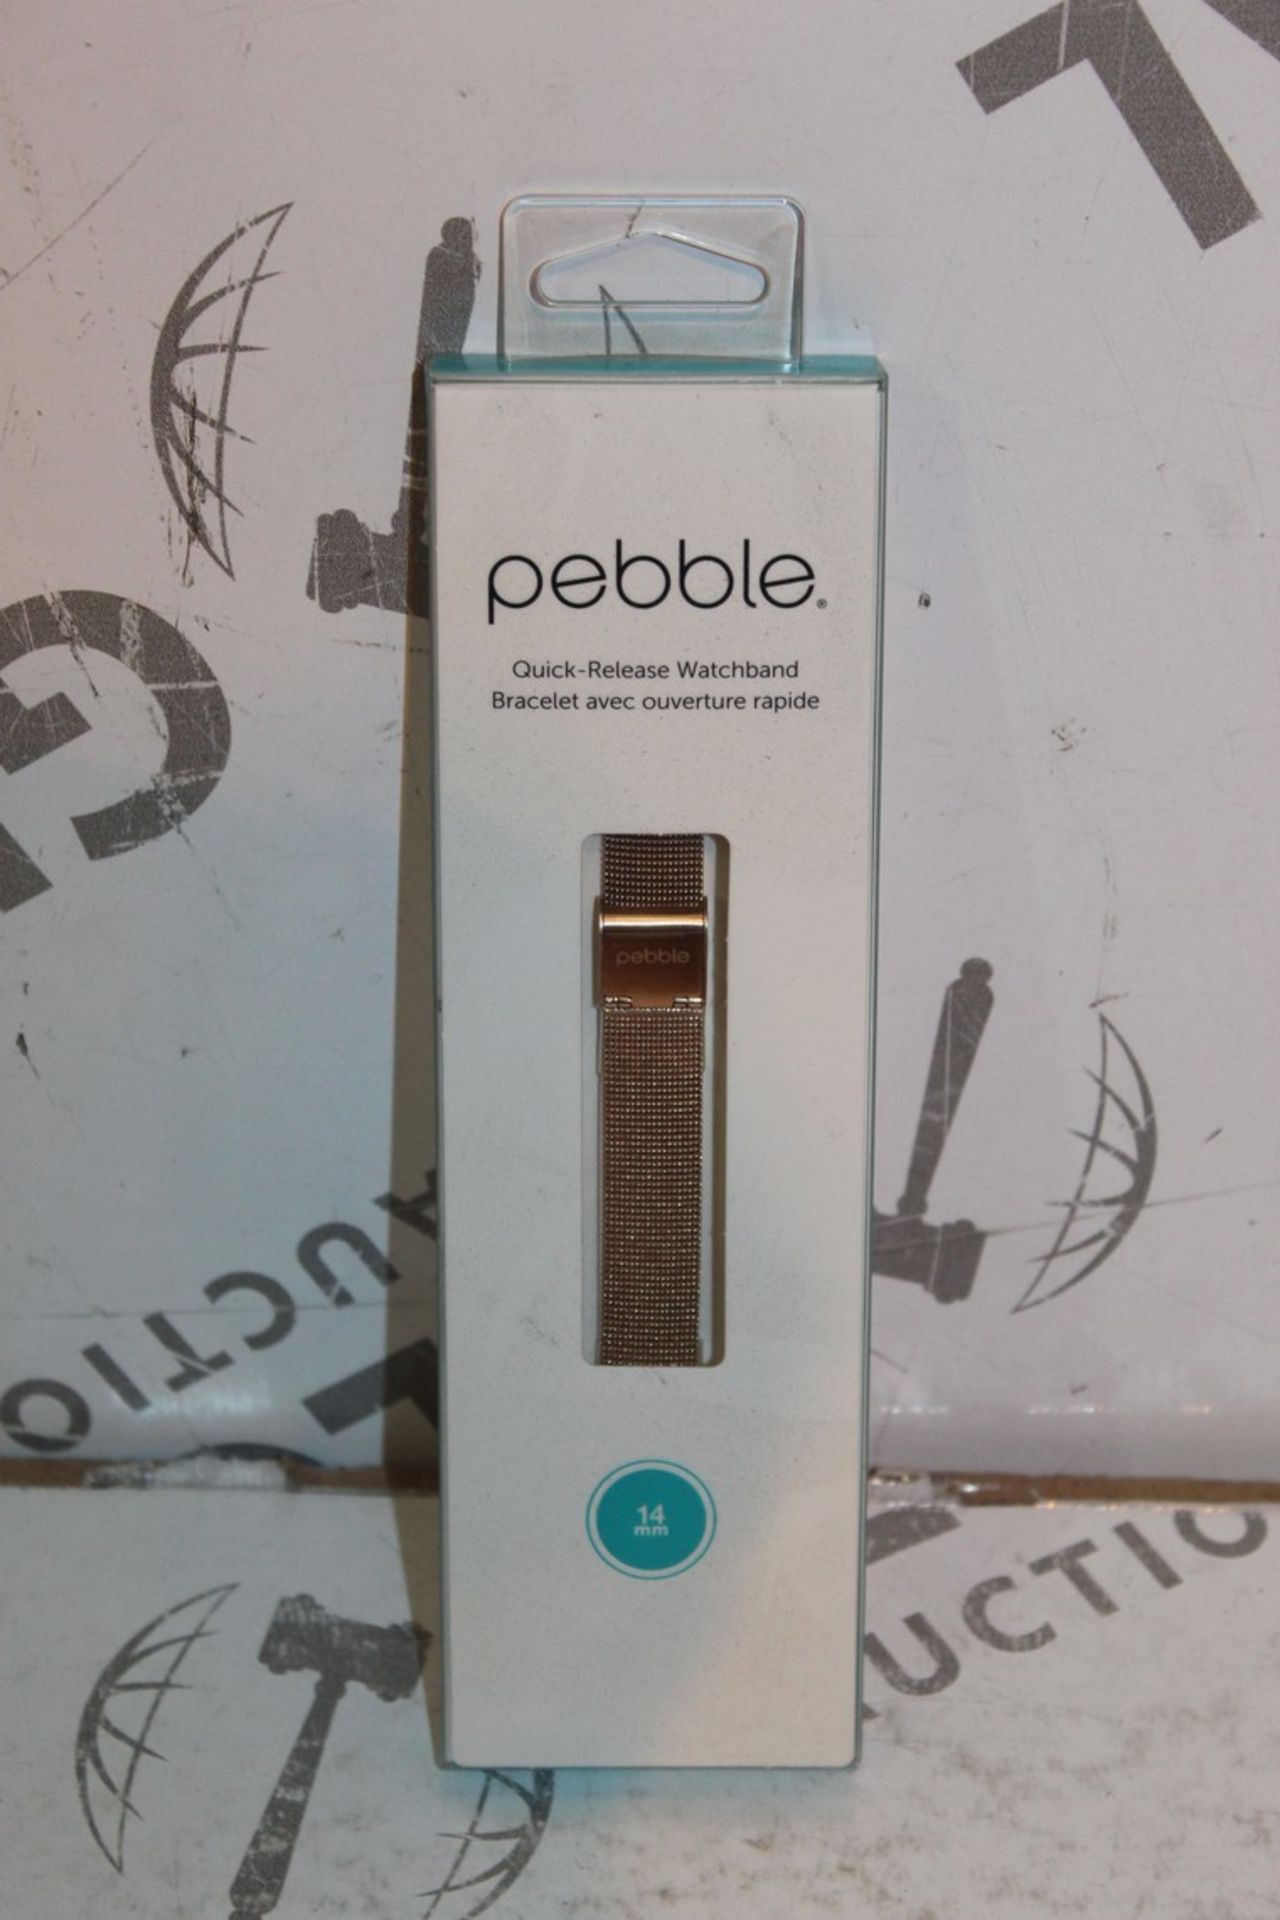 Box to Contain 5 Pebble Quick Release Watch Band Bracelet Combined RRP £100